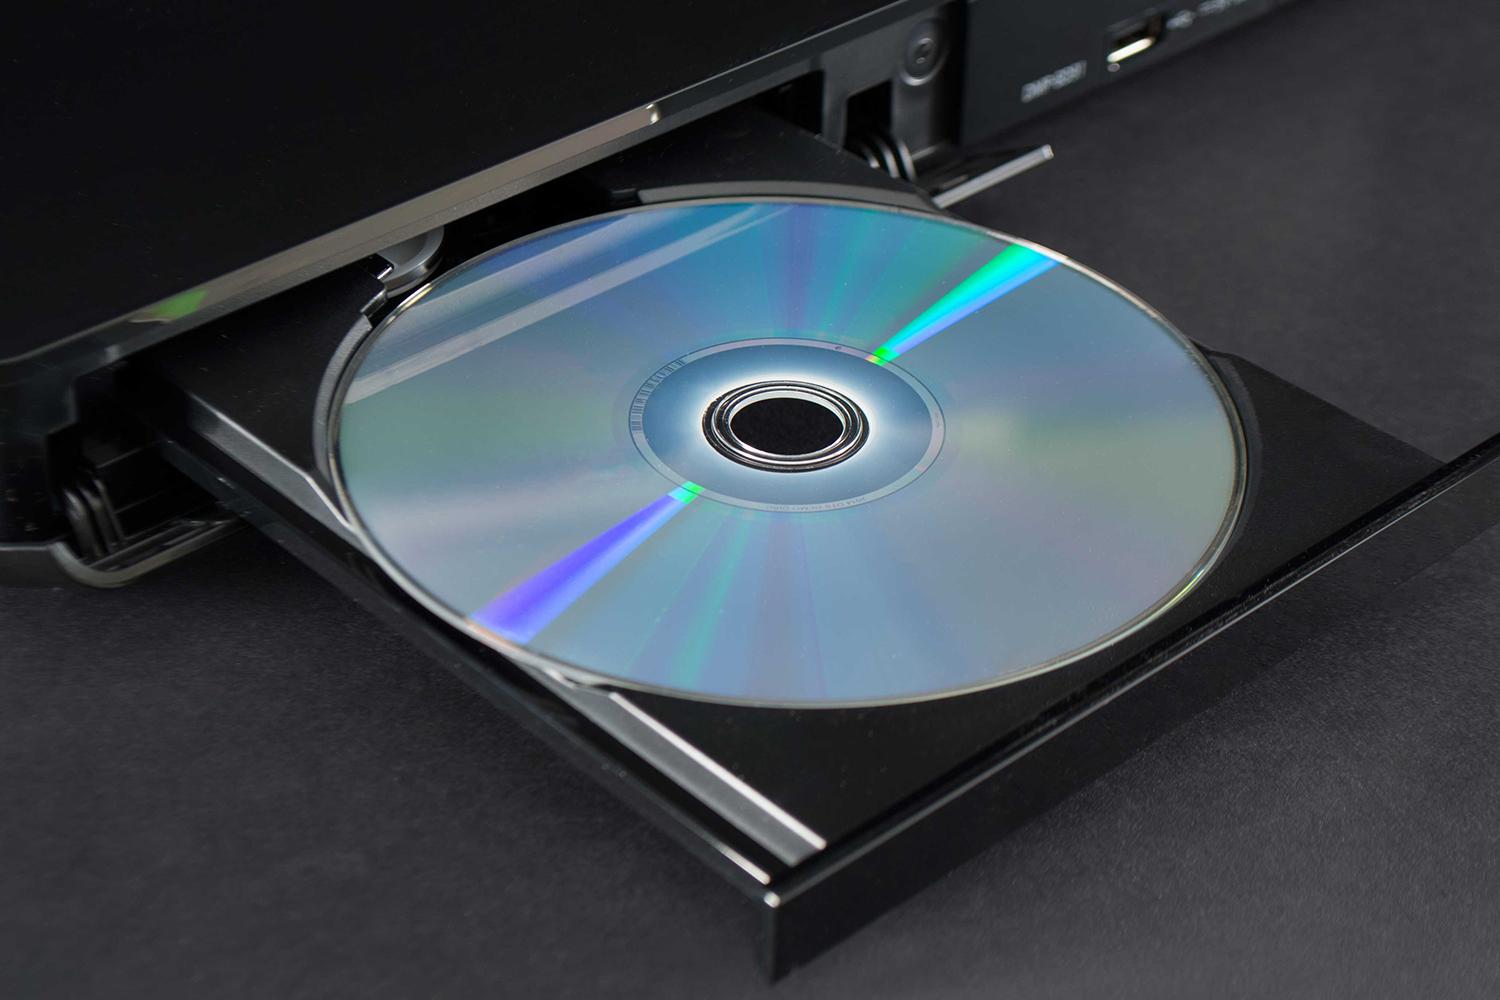 Best VHS-to-DVD converter machines of 2023